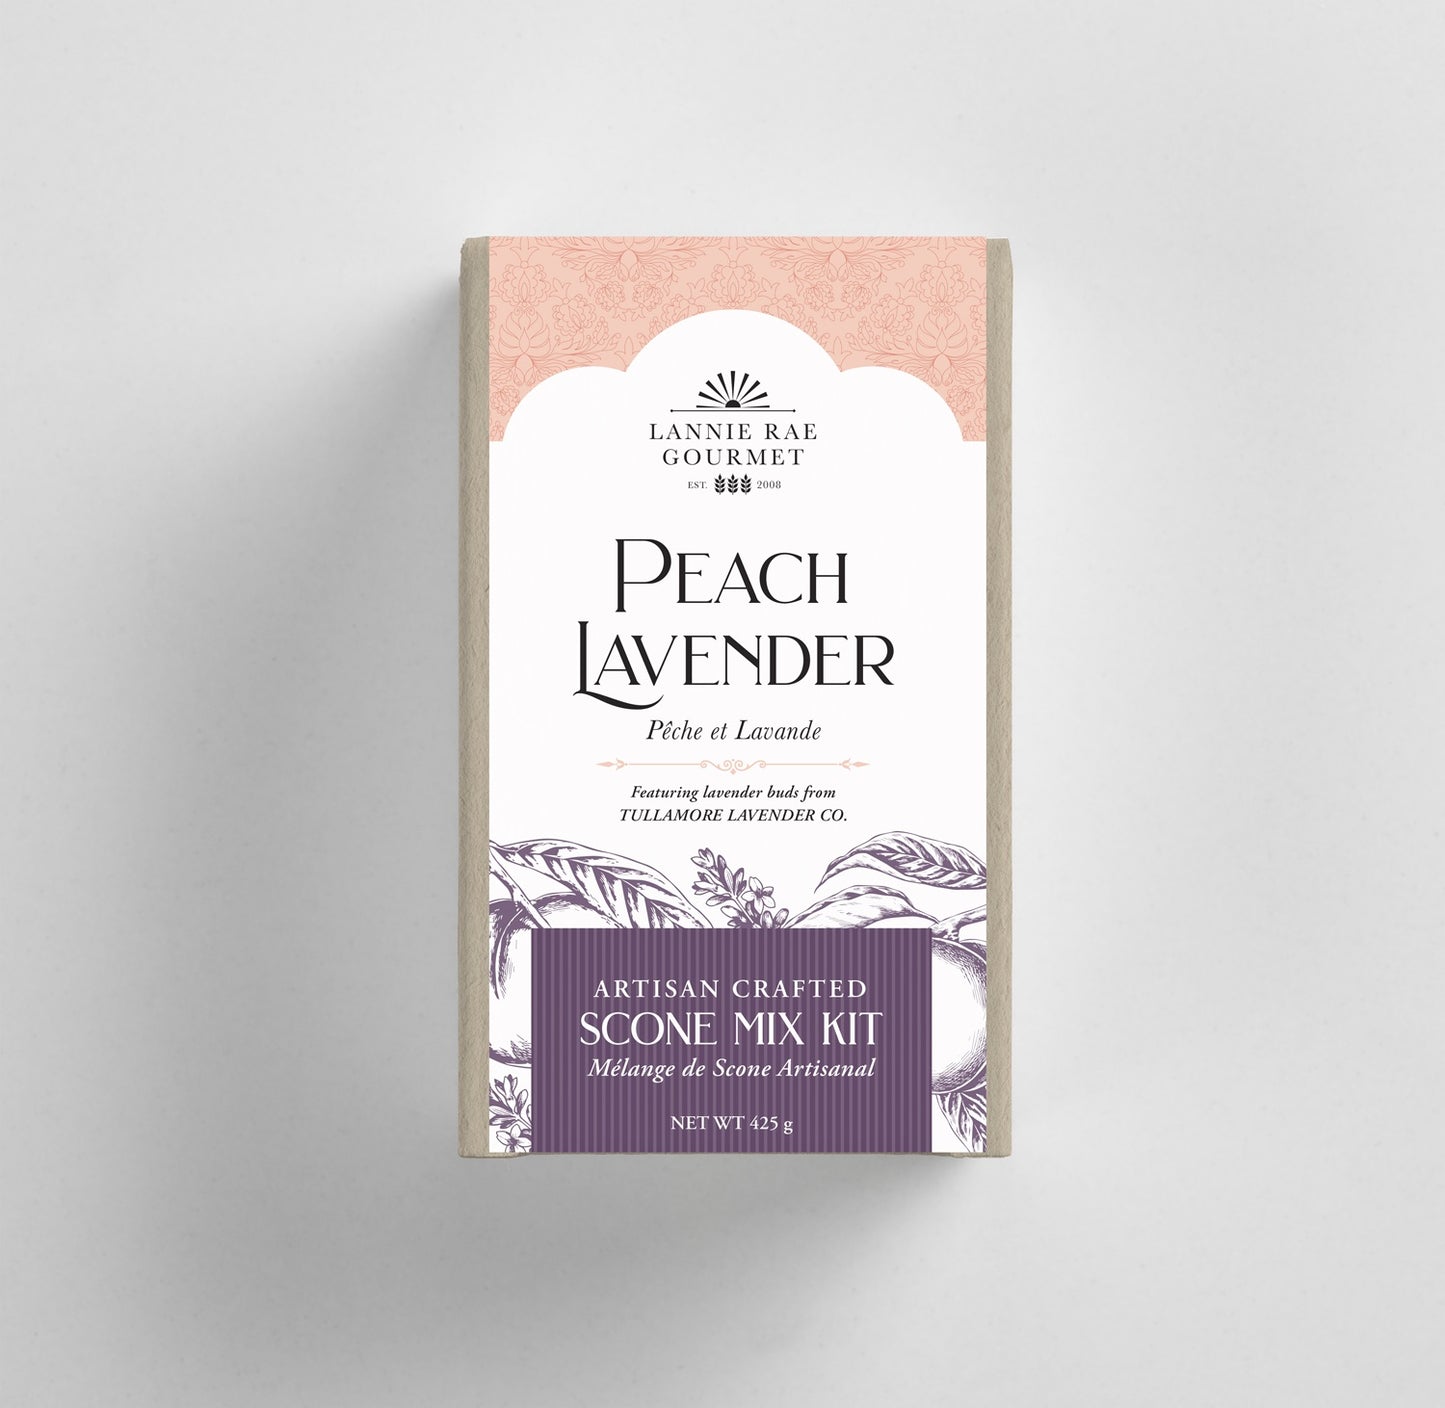 Box with label that states Peach Lavender Artisan Crafted Scone Mix Kit